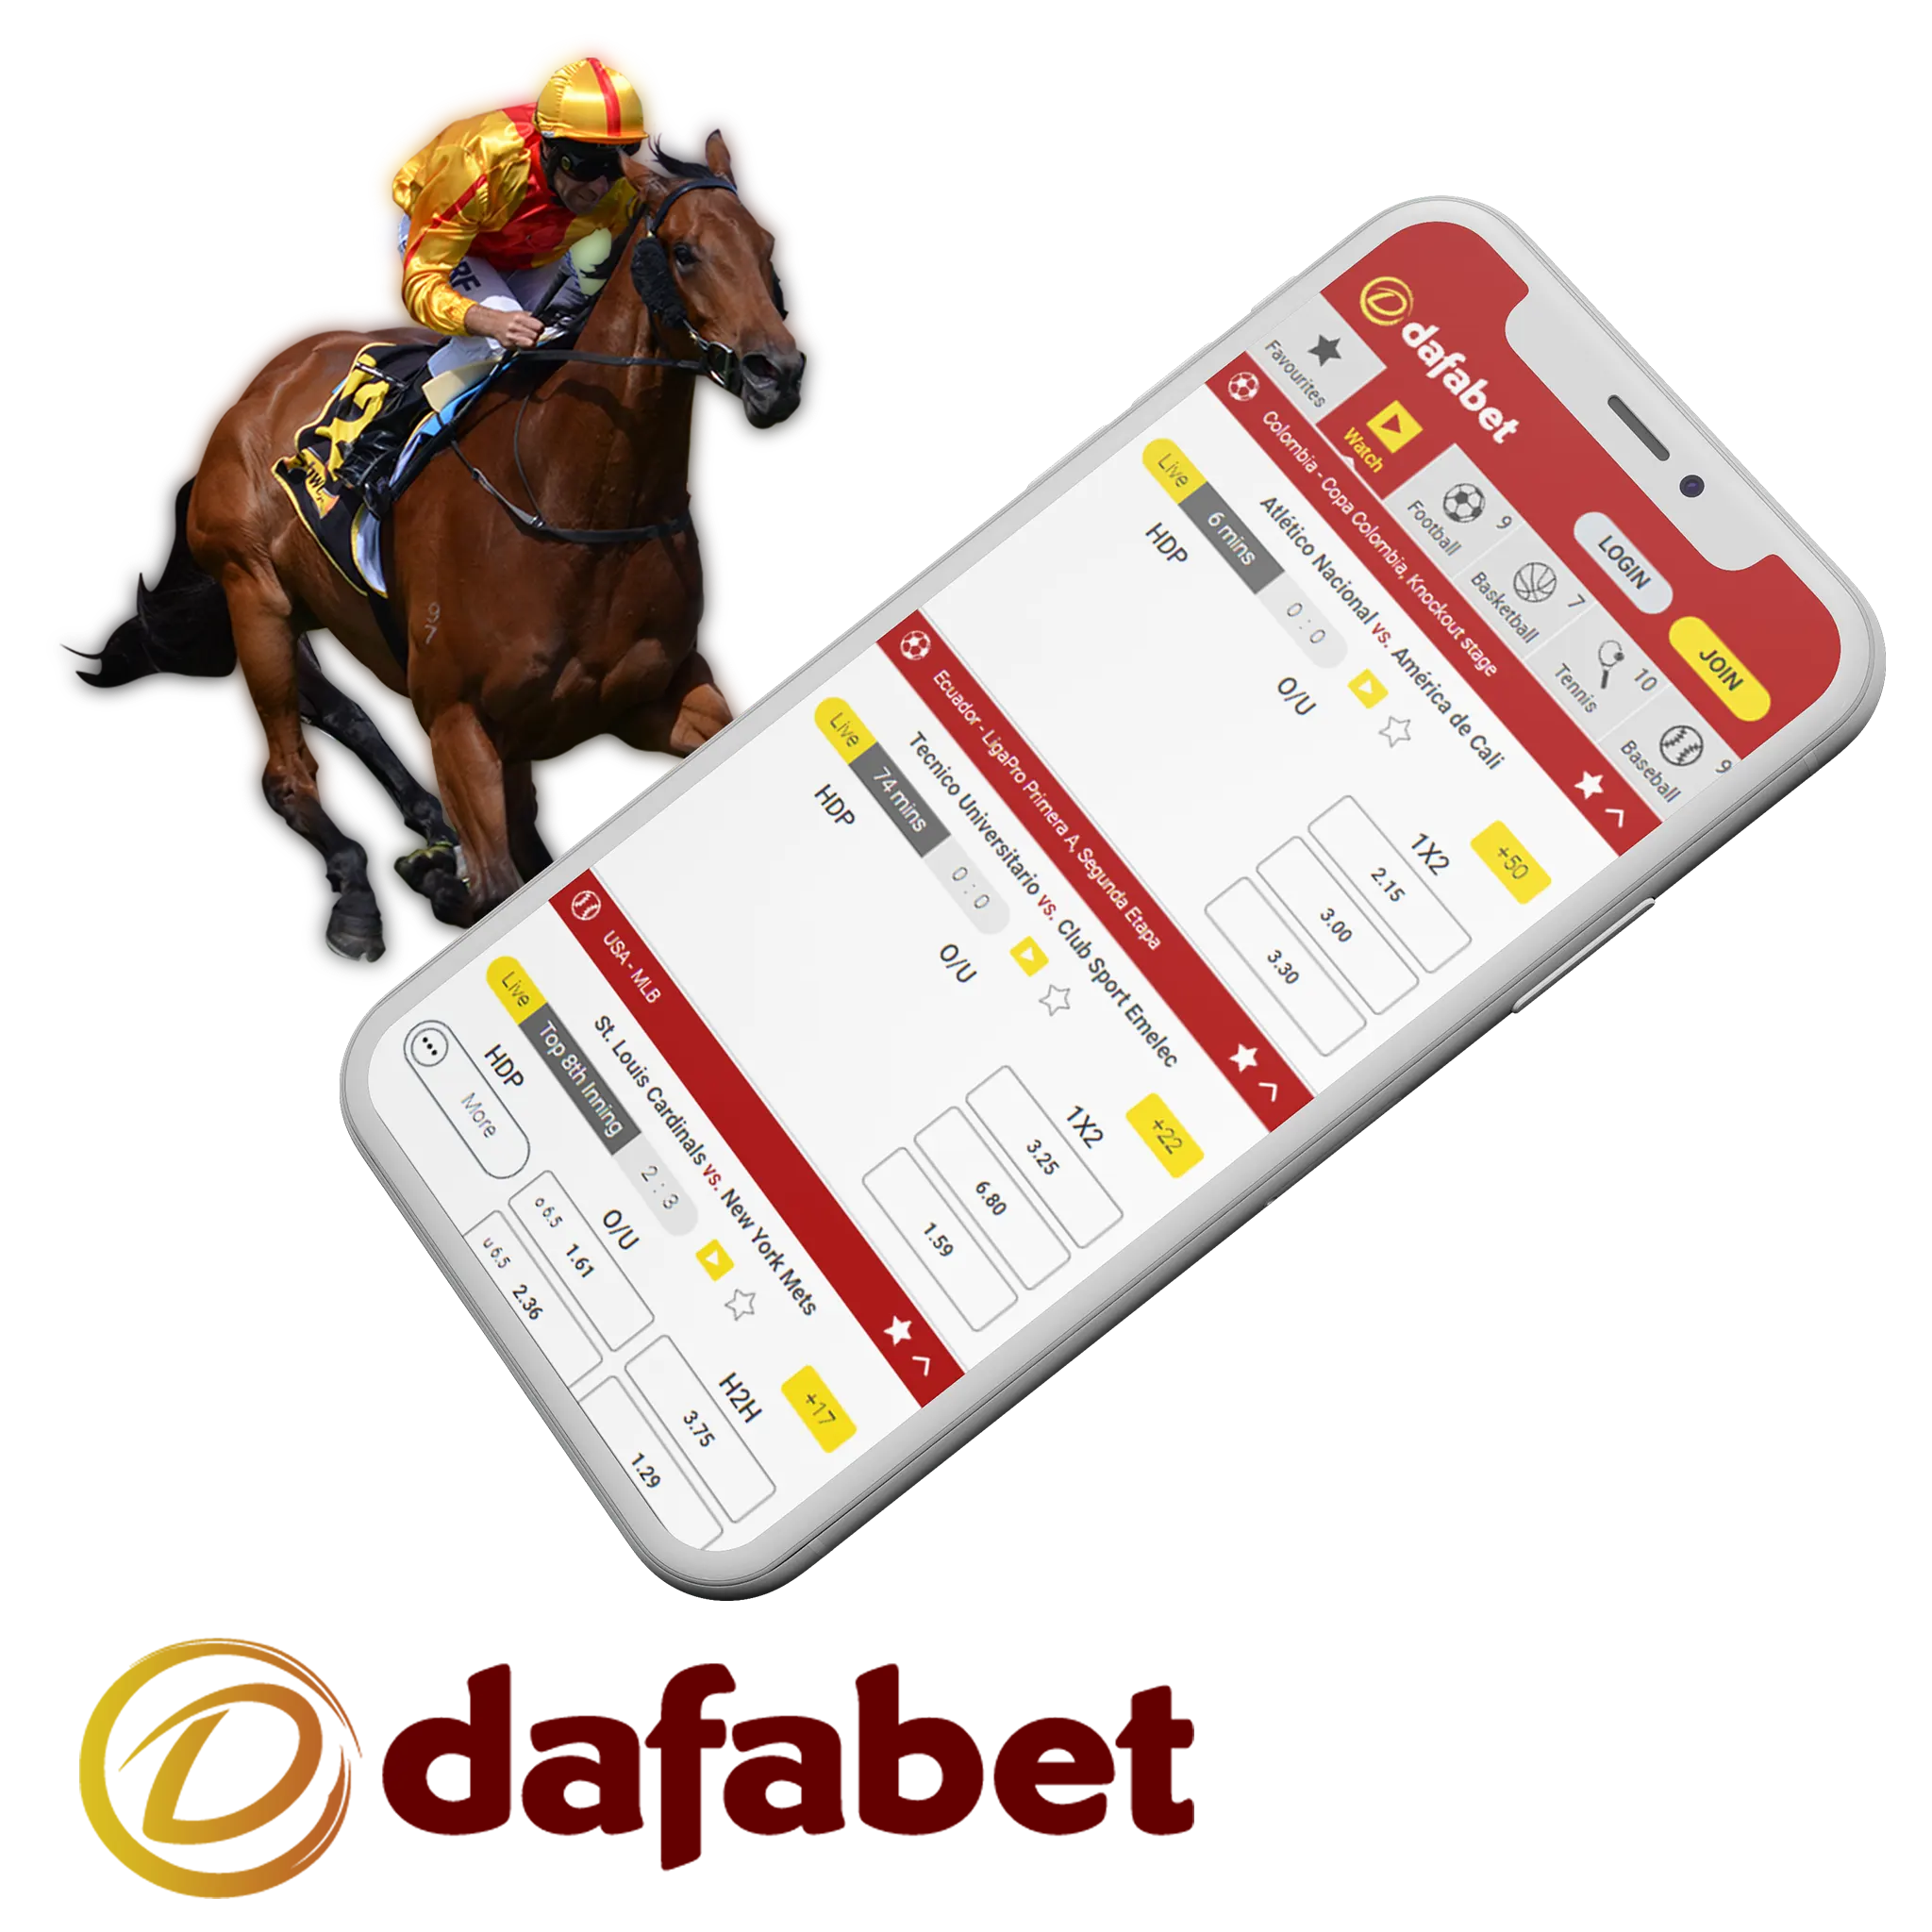 The Dafabet app provides various payment options for horse racing betting.